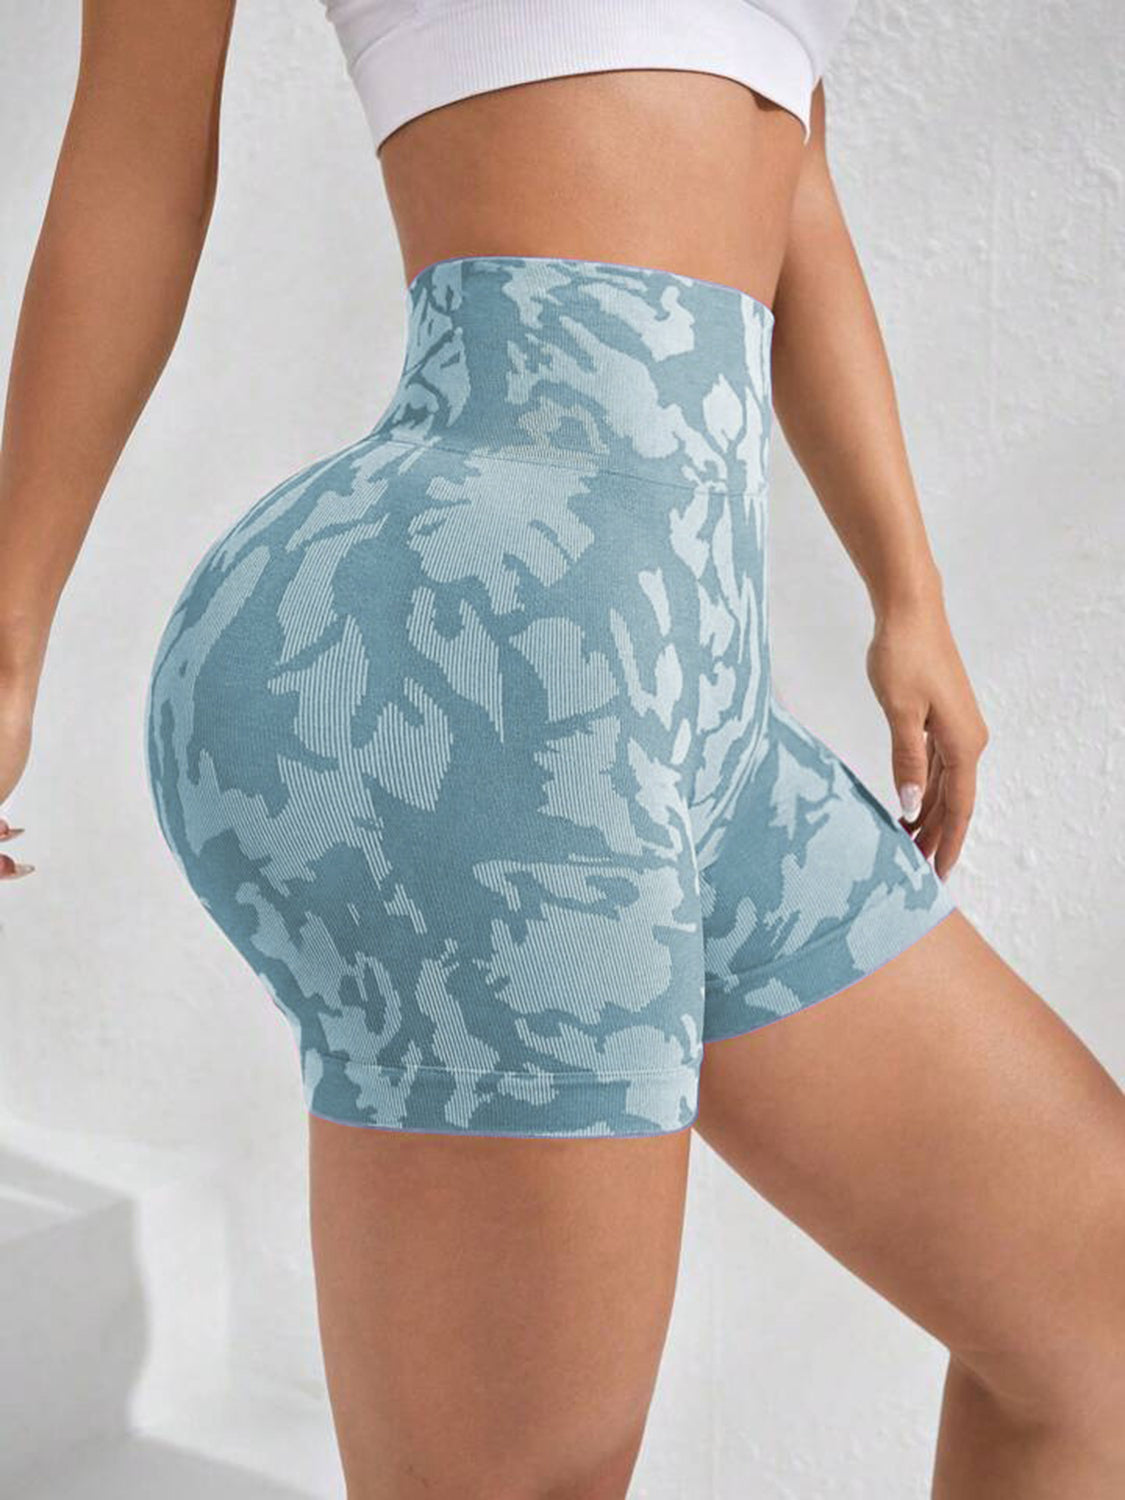 Get After It Printed High Waist Active Shorts (Multiple Colors) - BP